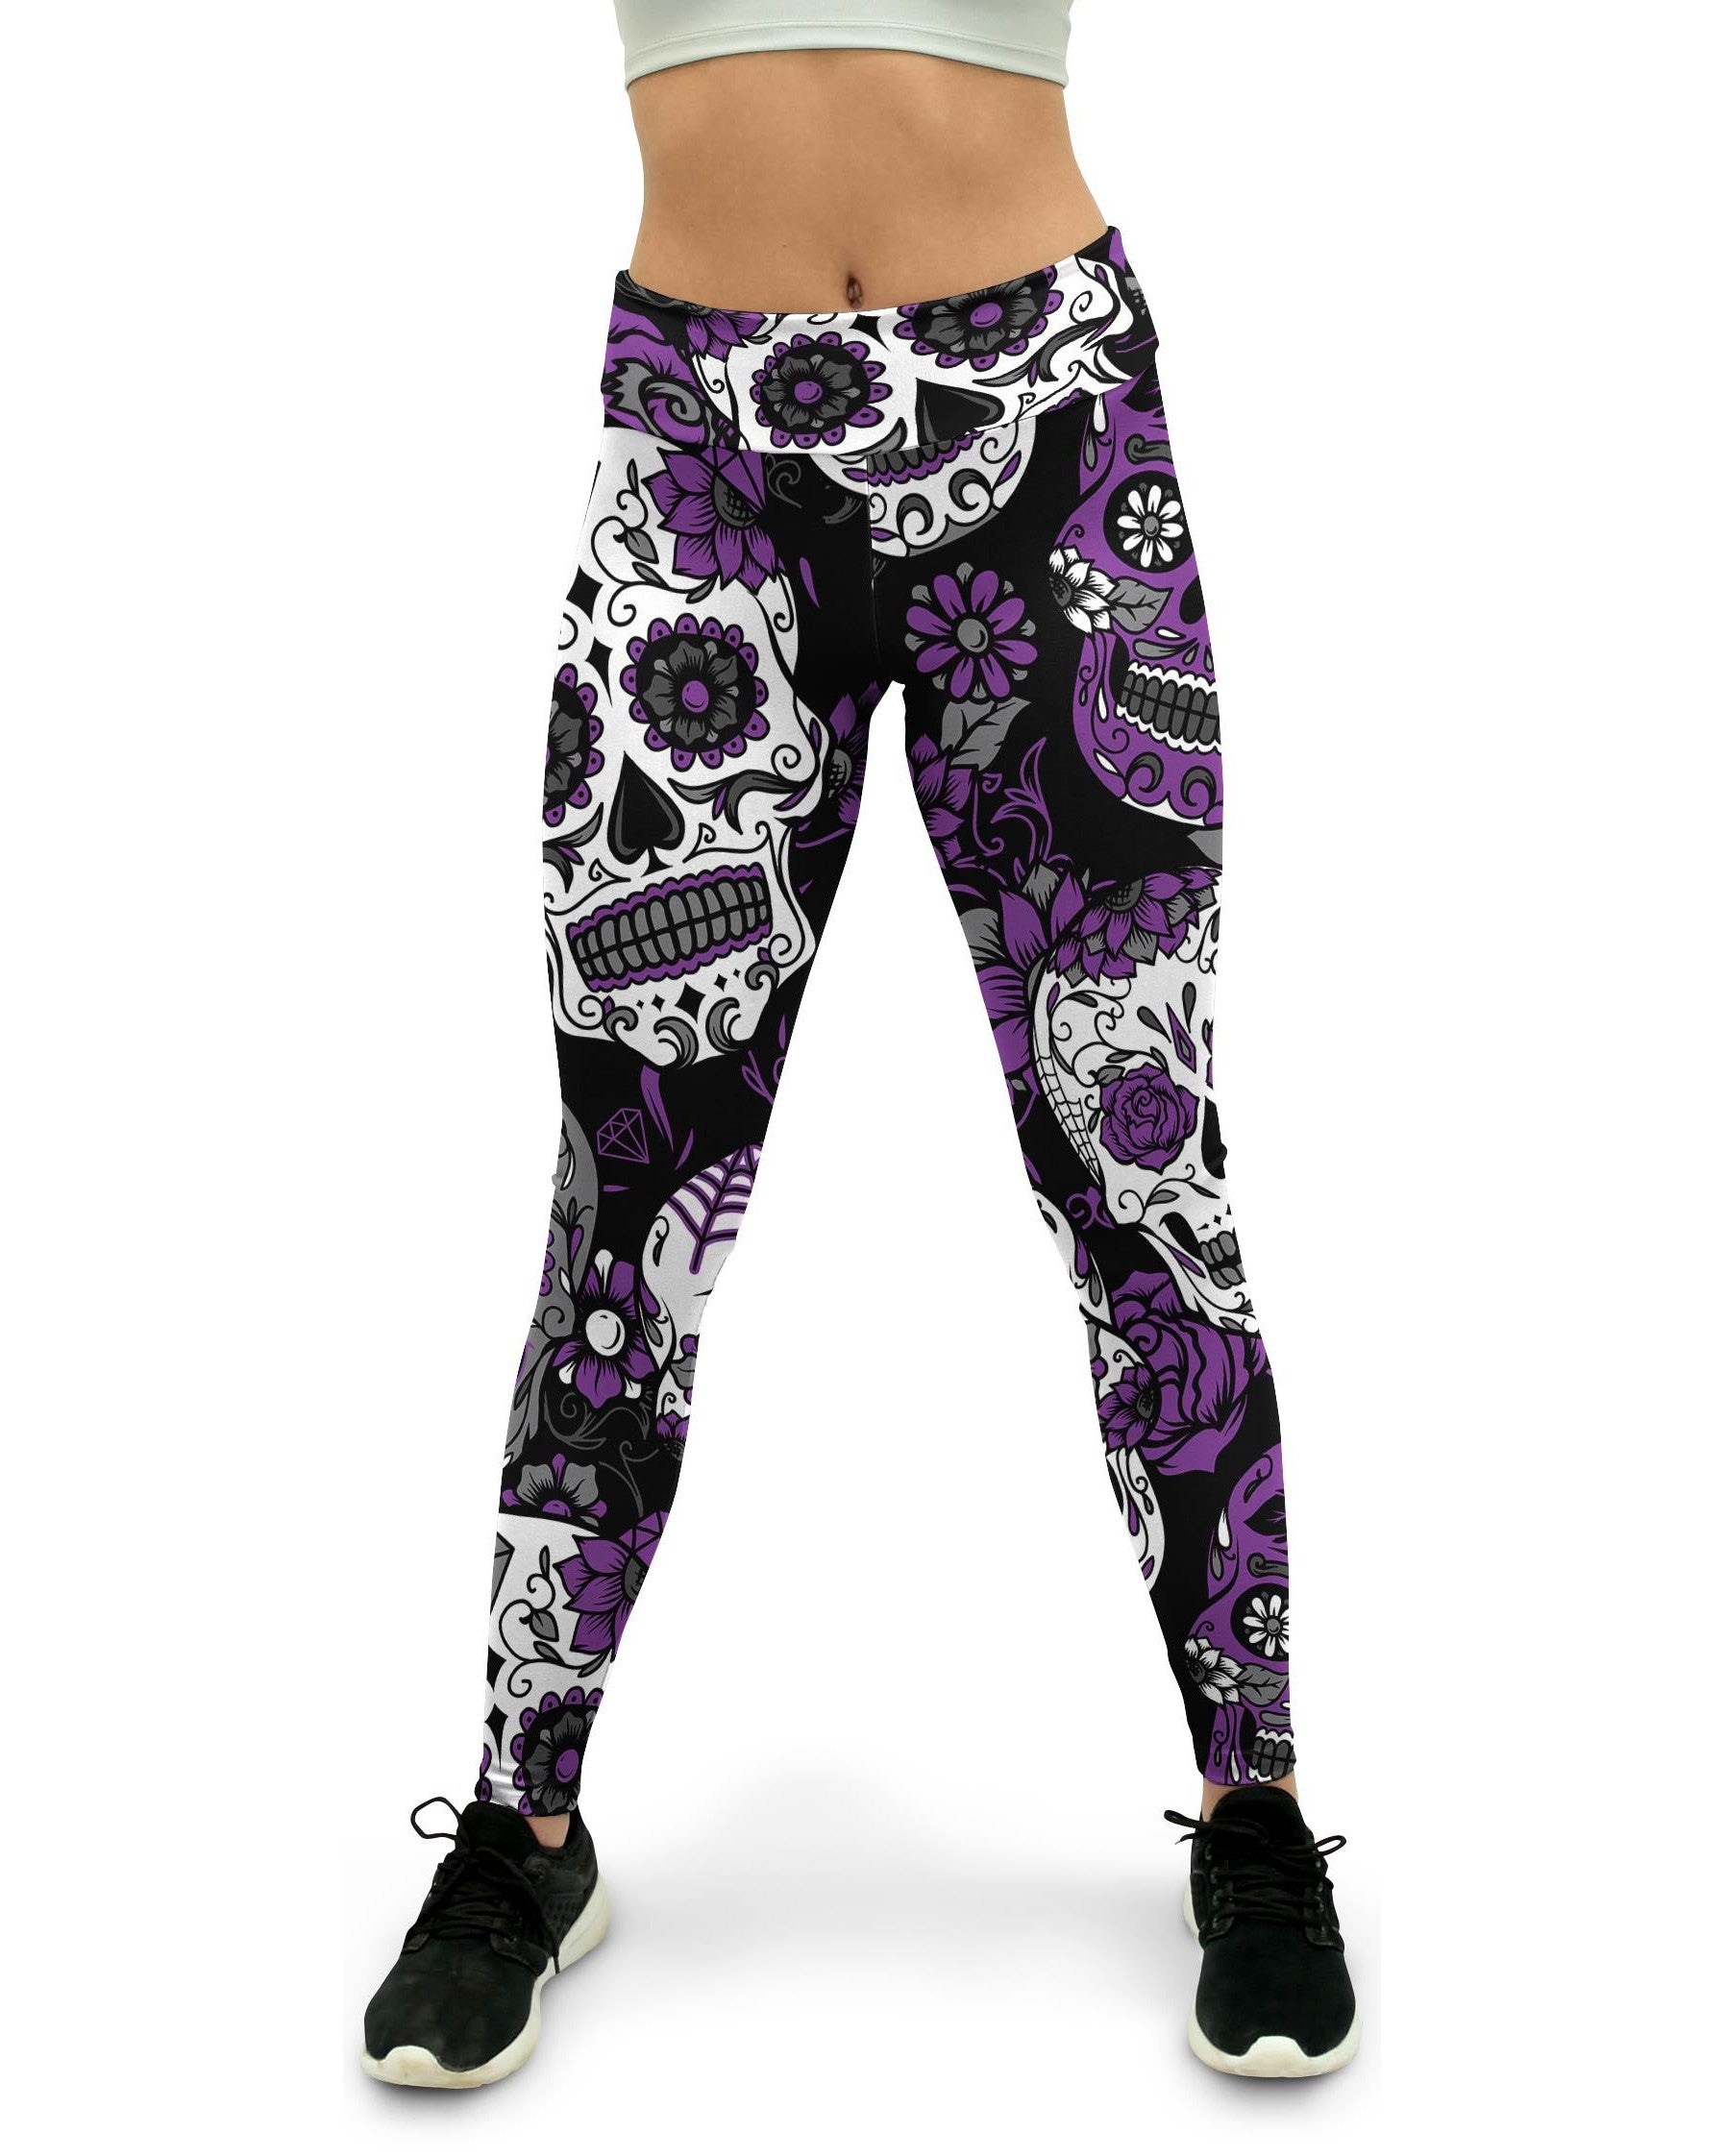 6 Day Skull workout pants for Gym